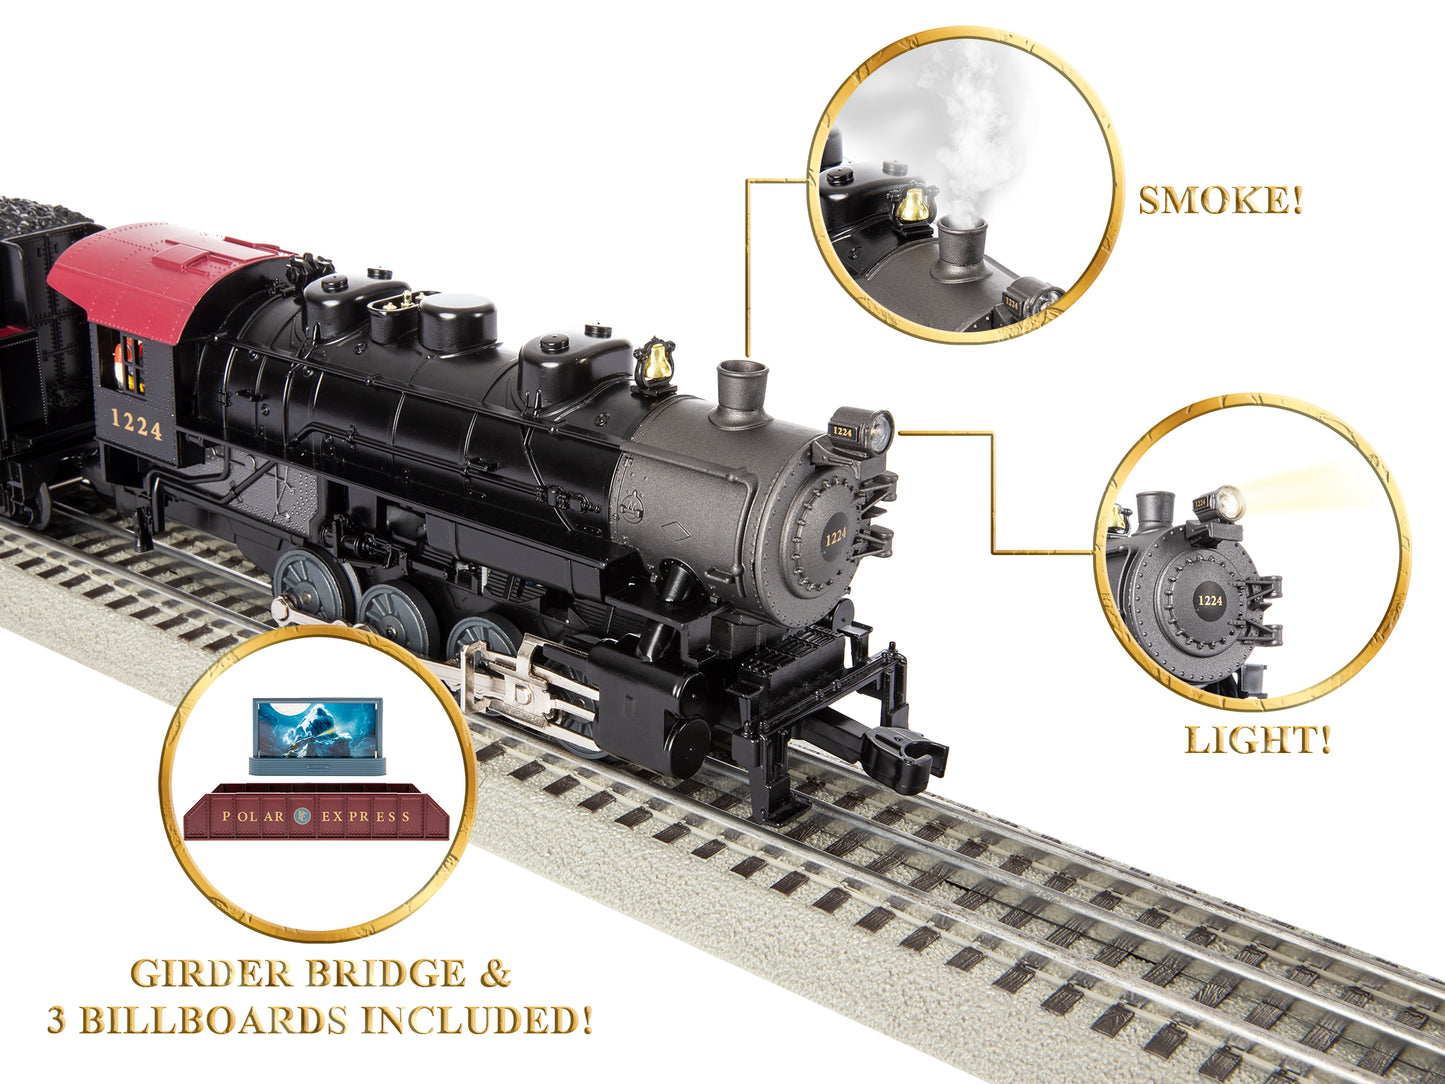 Lionel model train The Polar Express Freight LionChief. Smoke coming from engine.